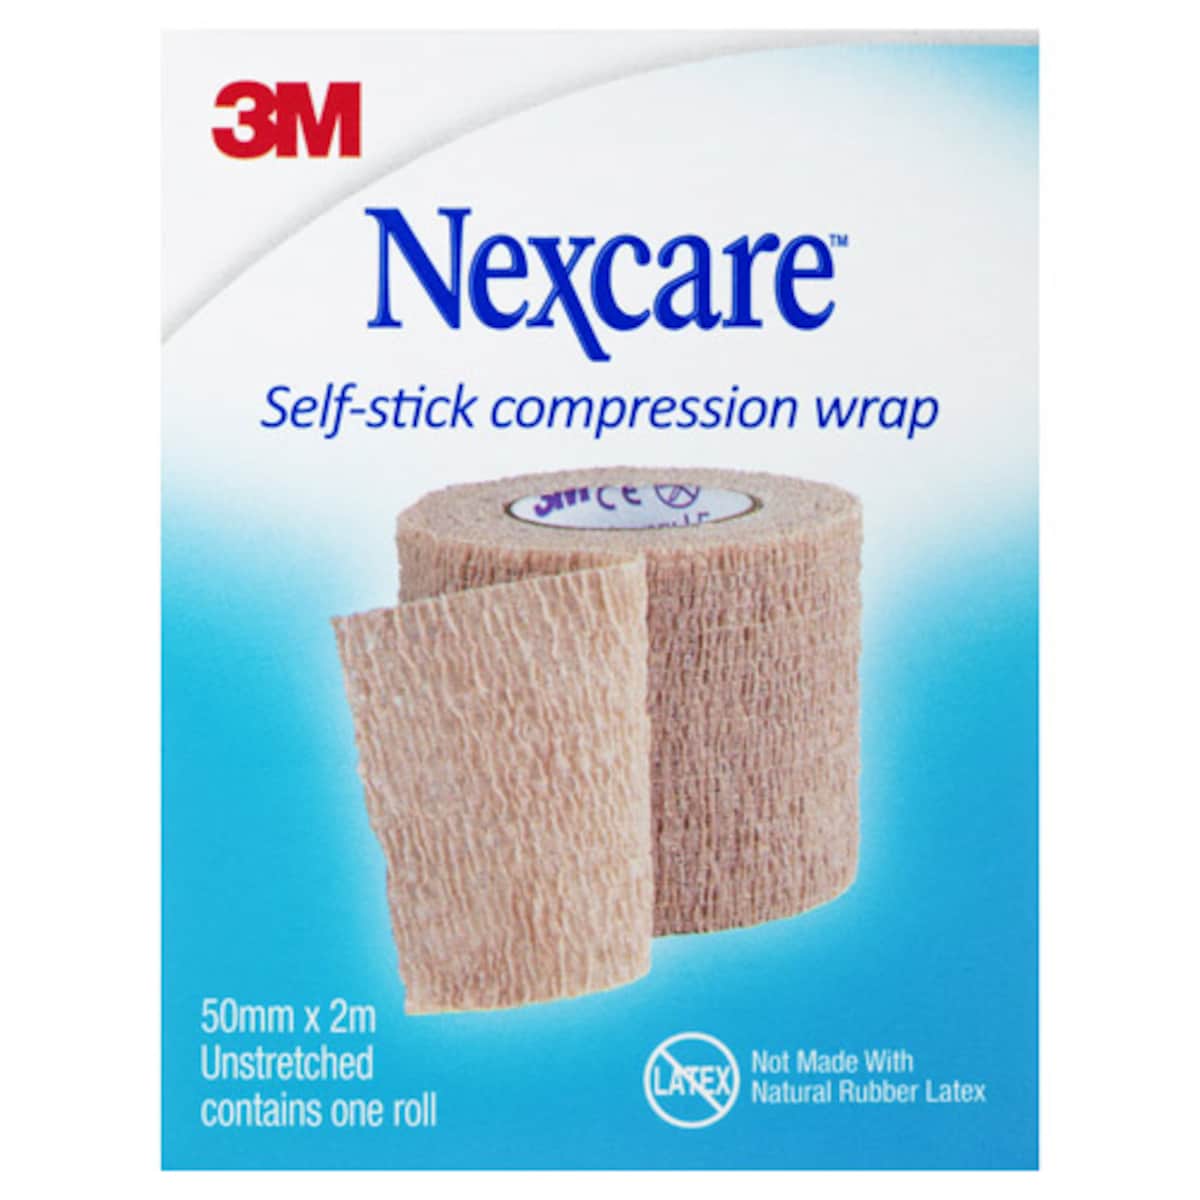 Nexcare Self-Stick Compression Wrap 50mm x 2m Unstretched 1 Roll